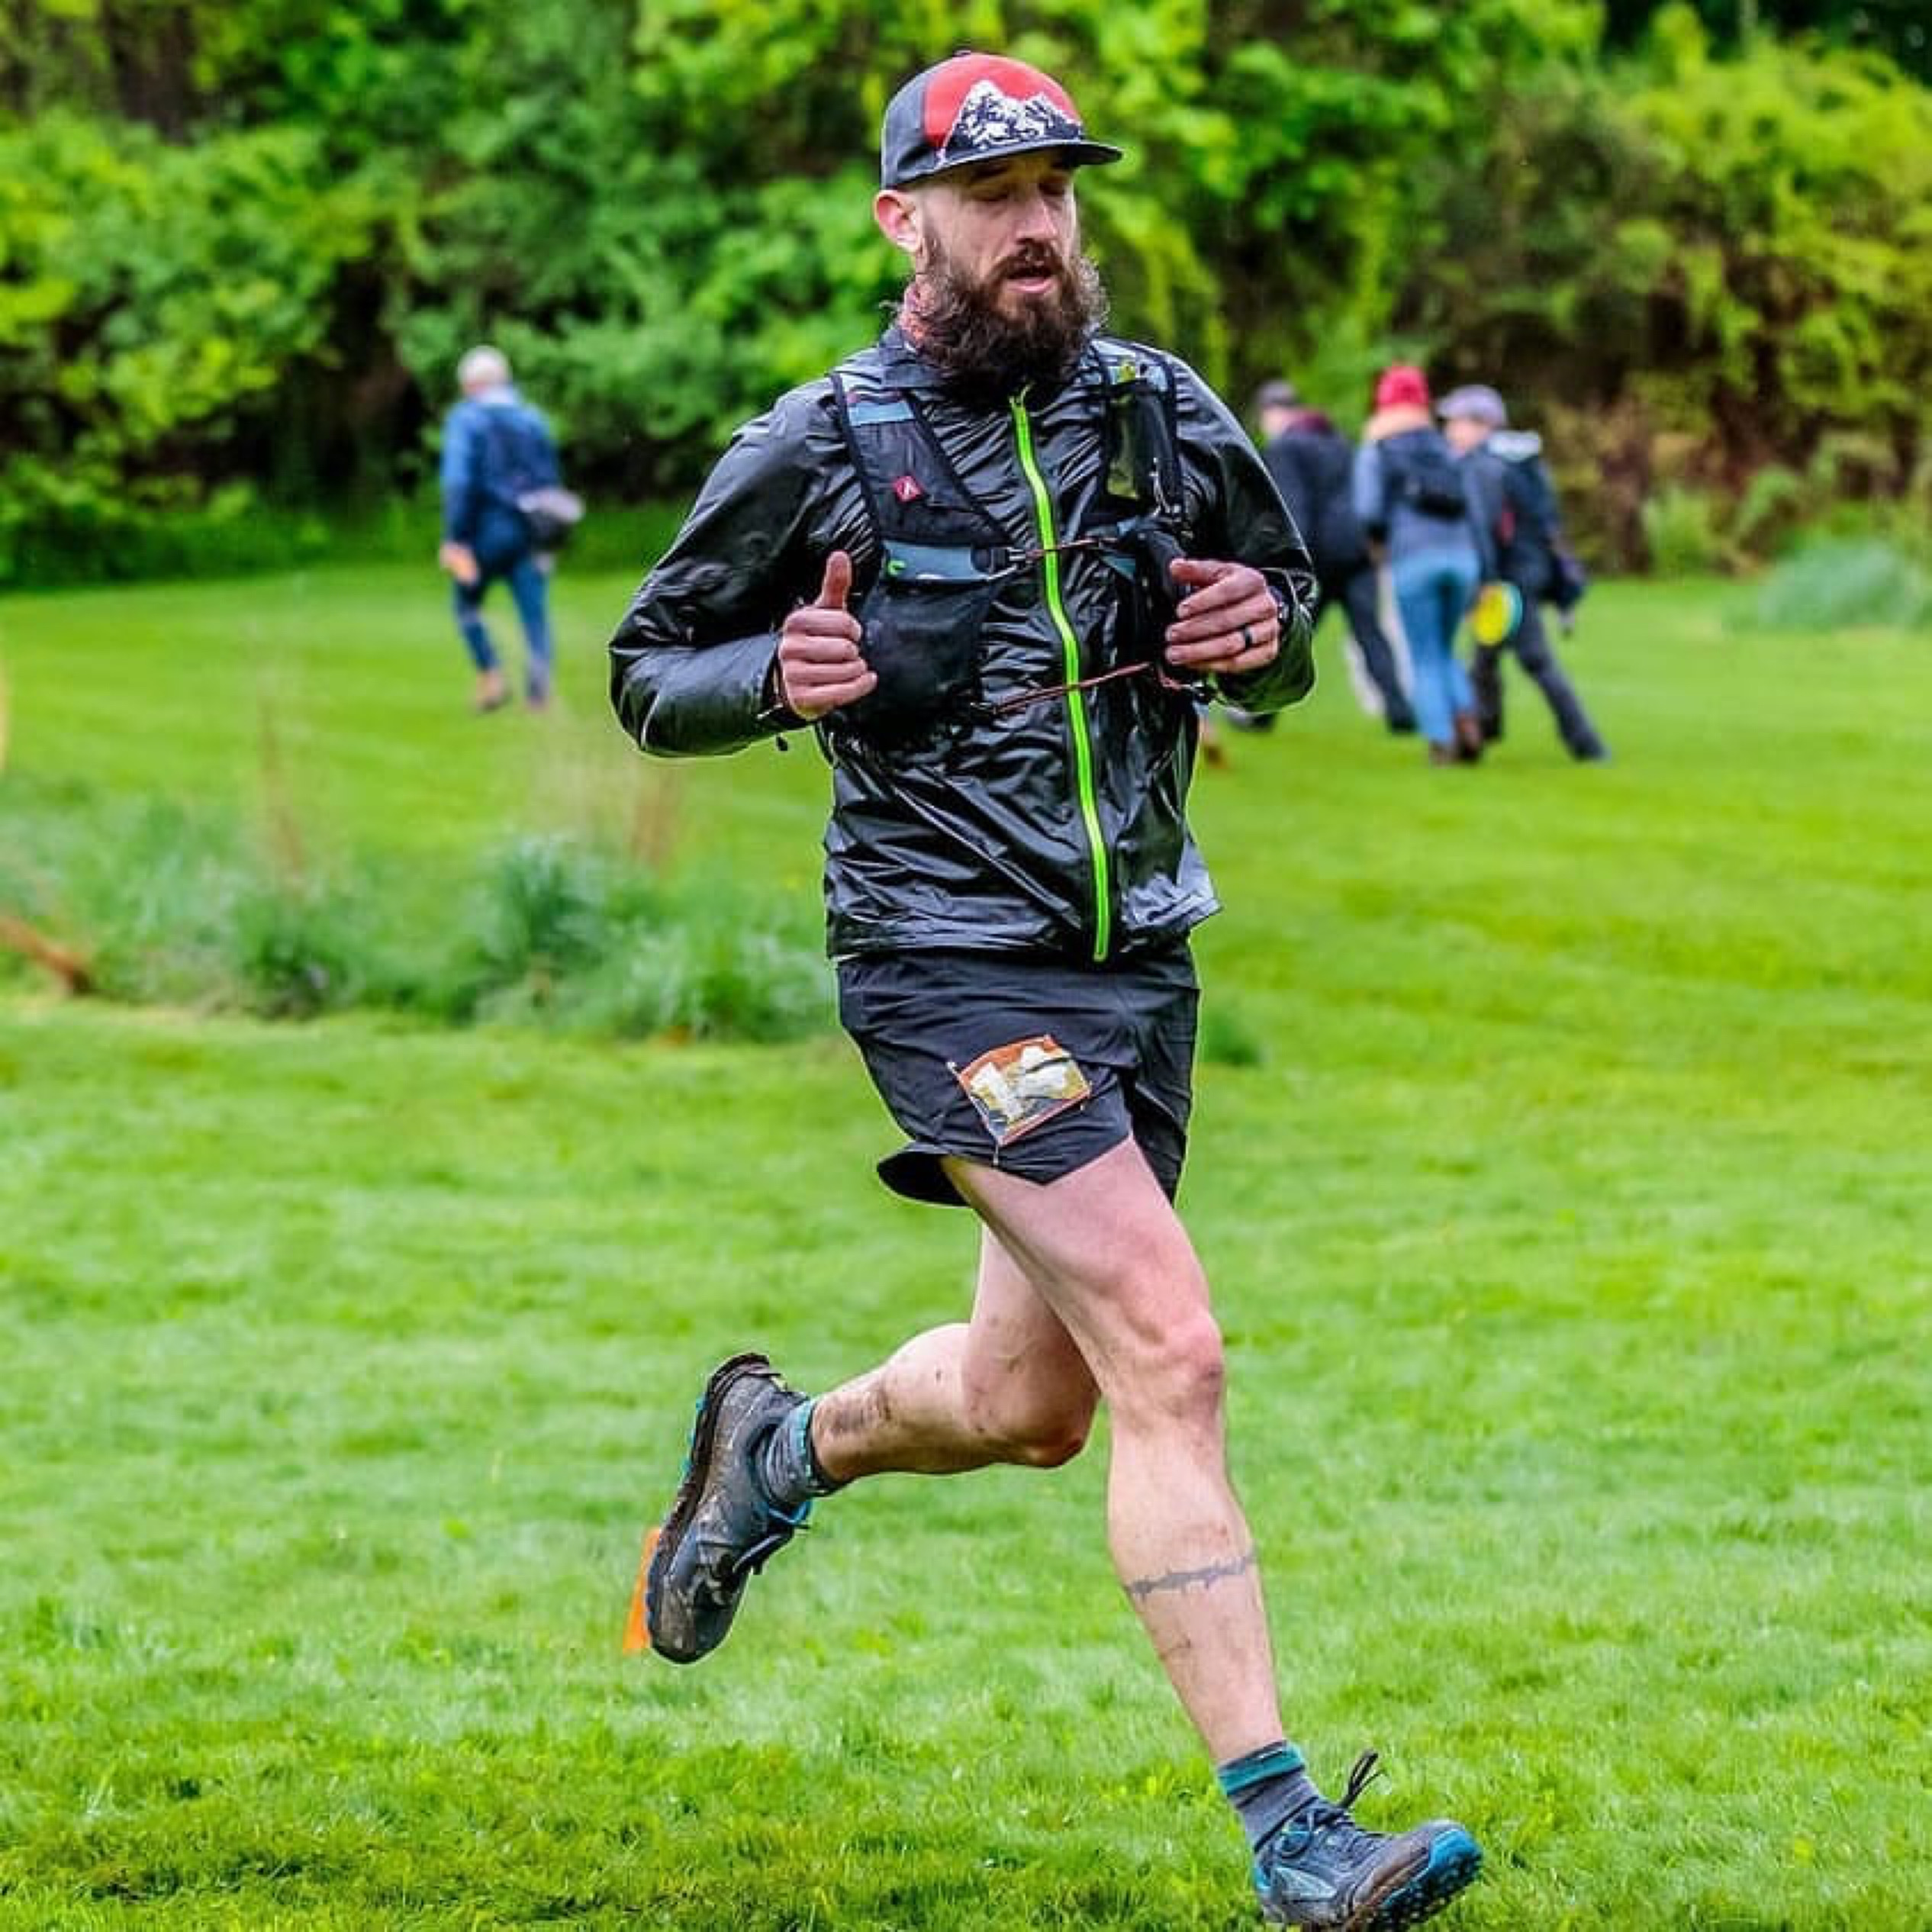 What happens when you combine an outdoor adventurer with a competitive endurance sports athlete? You get an ultra runner.